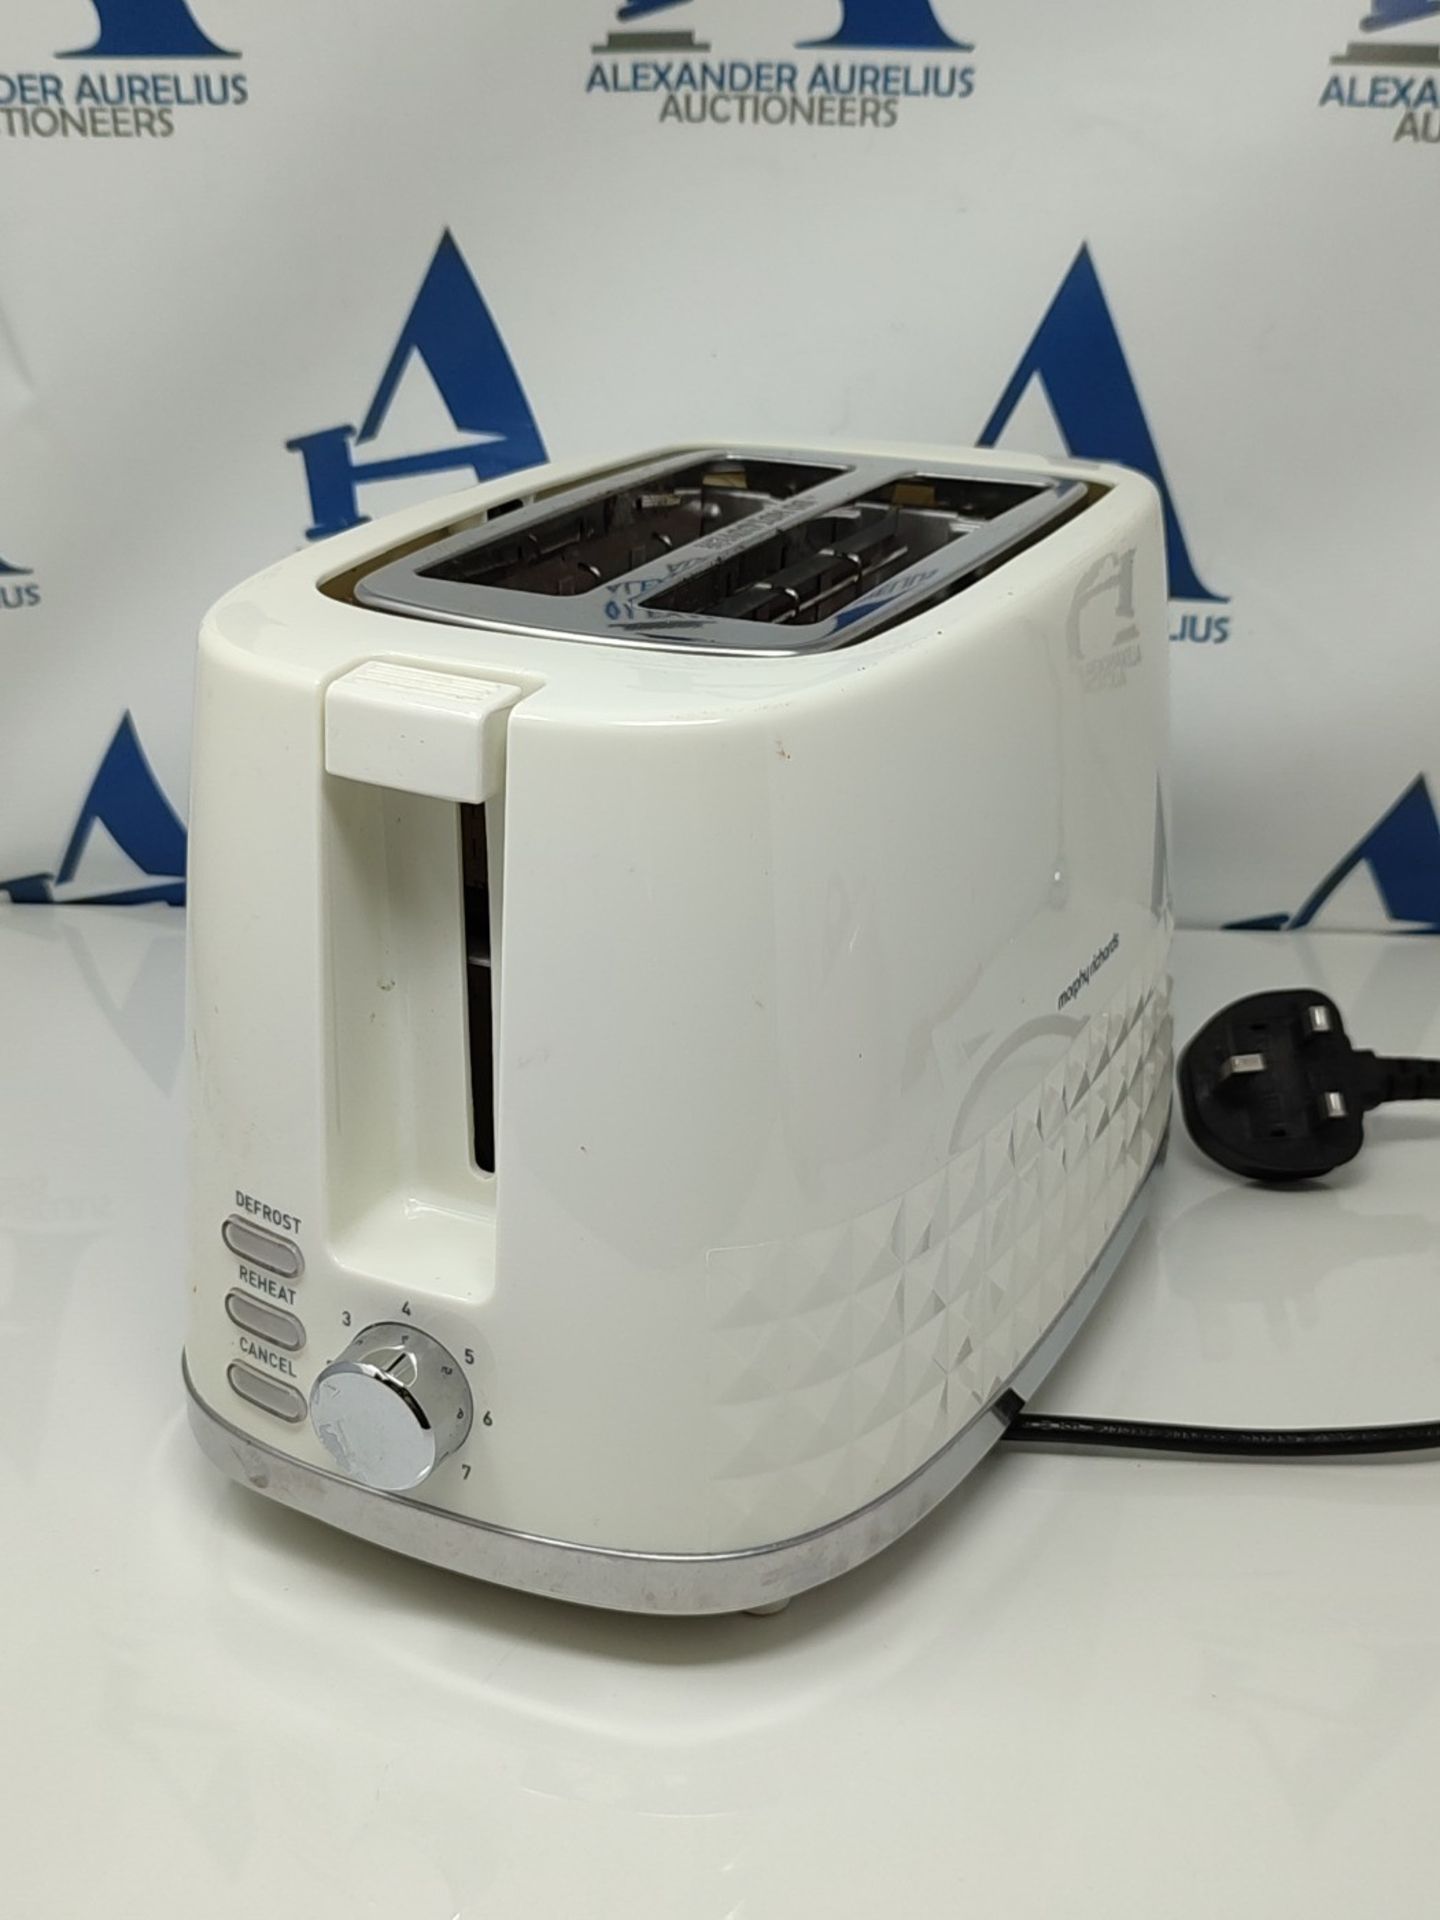 Morphy Richards Dimensions 2 Slice Toaster 220022 Two Slice Toaster Cream toaster - Image 2 of 3